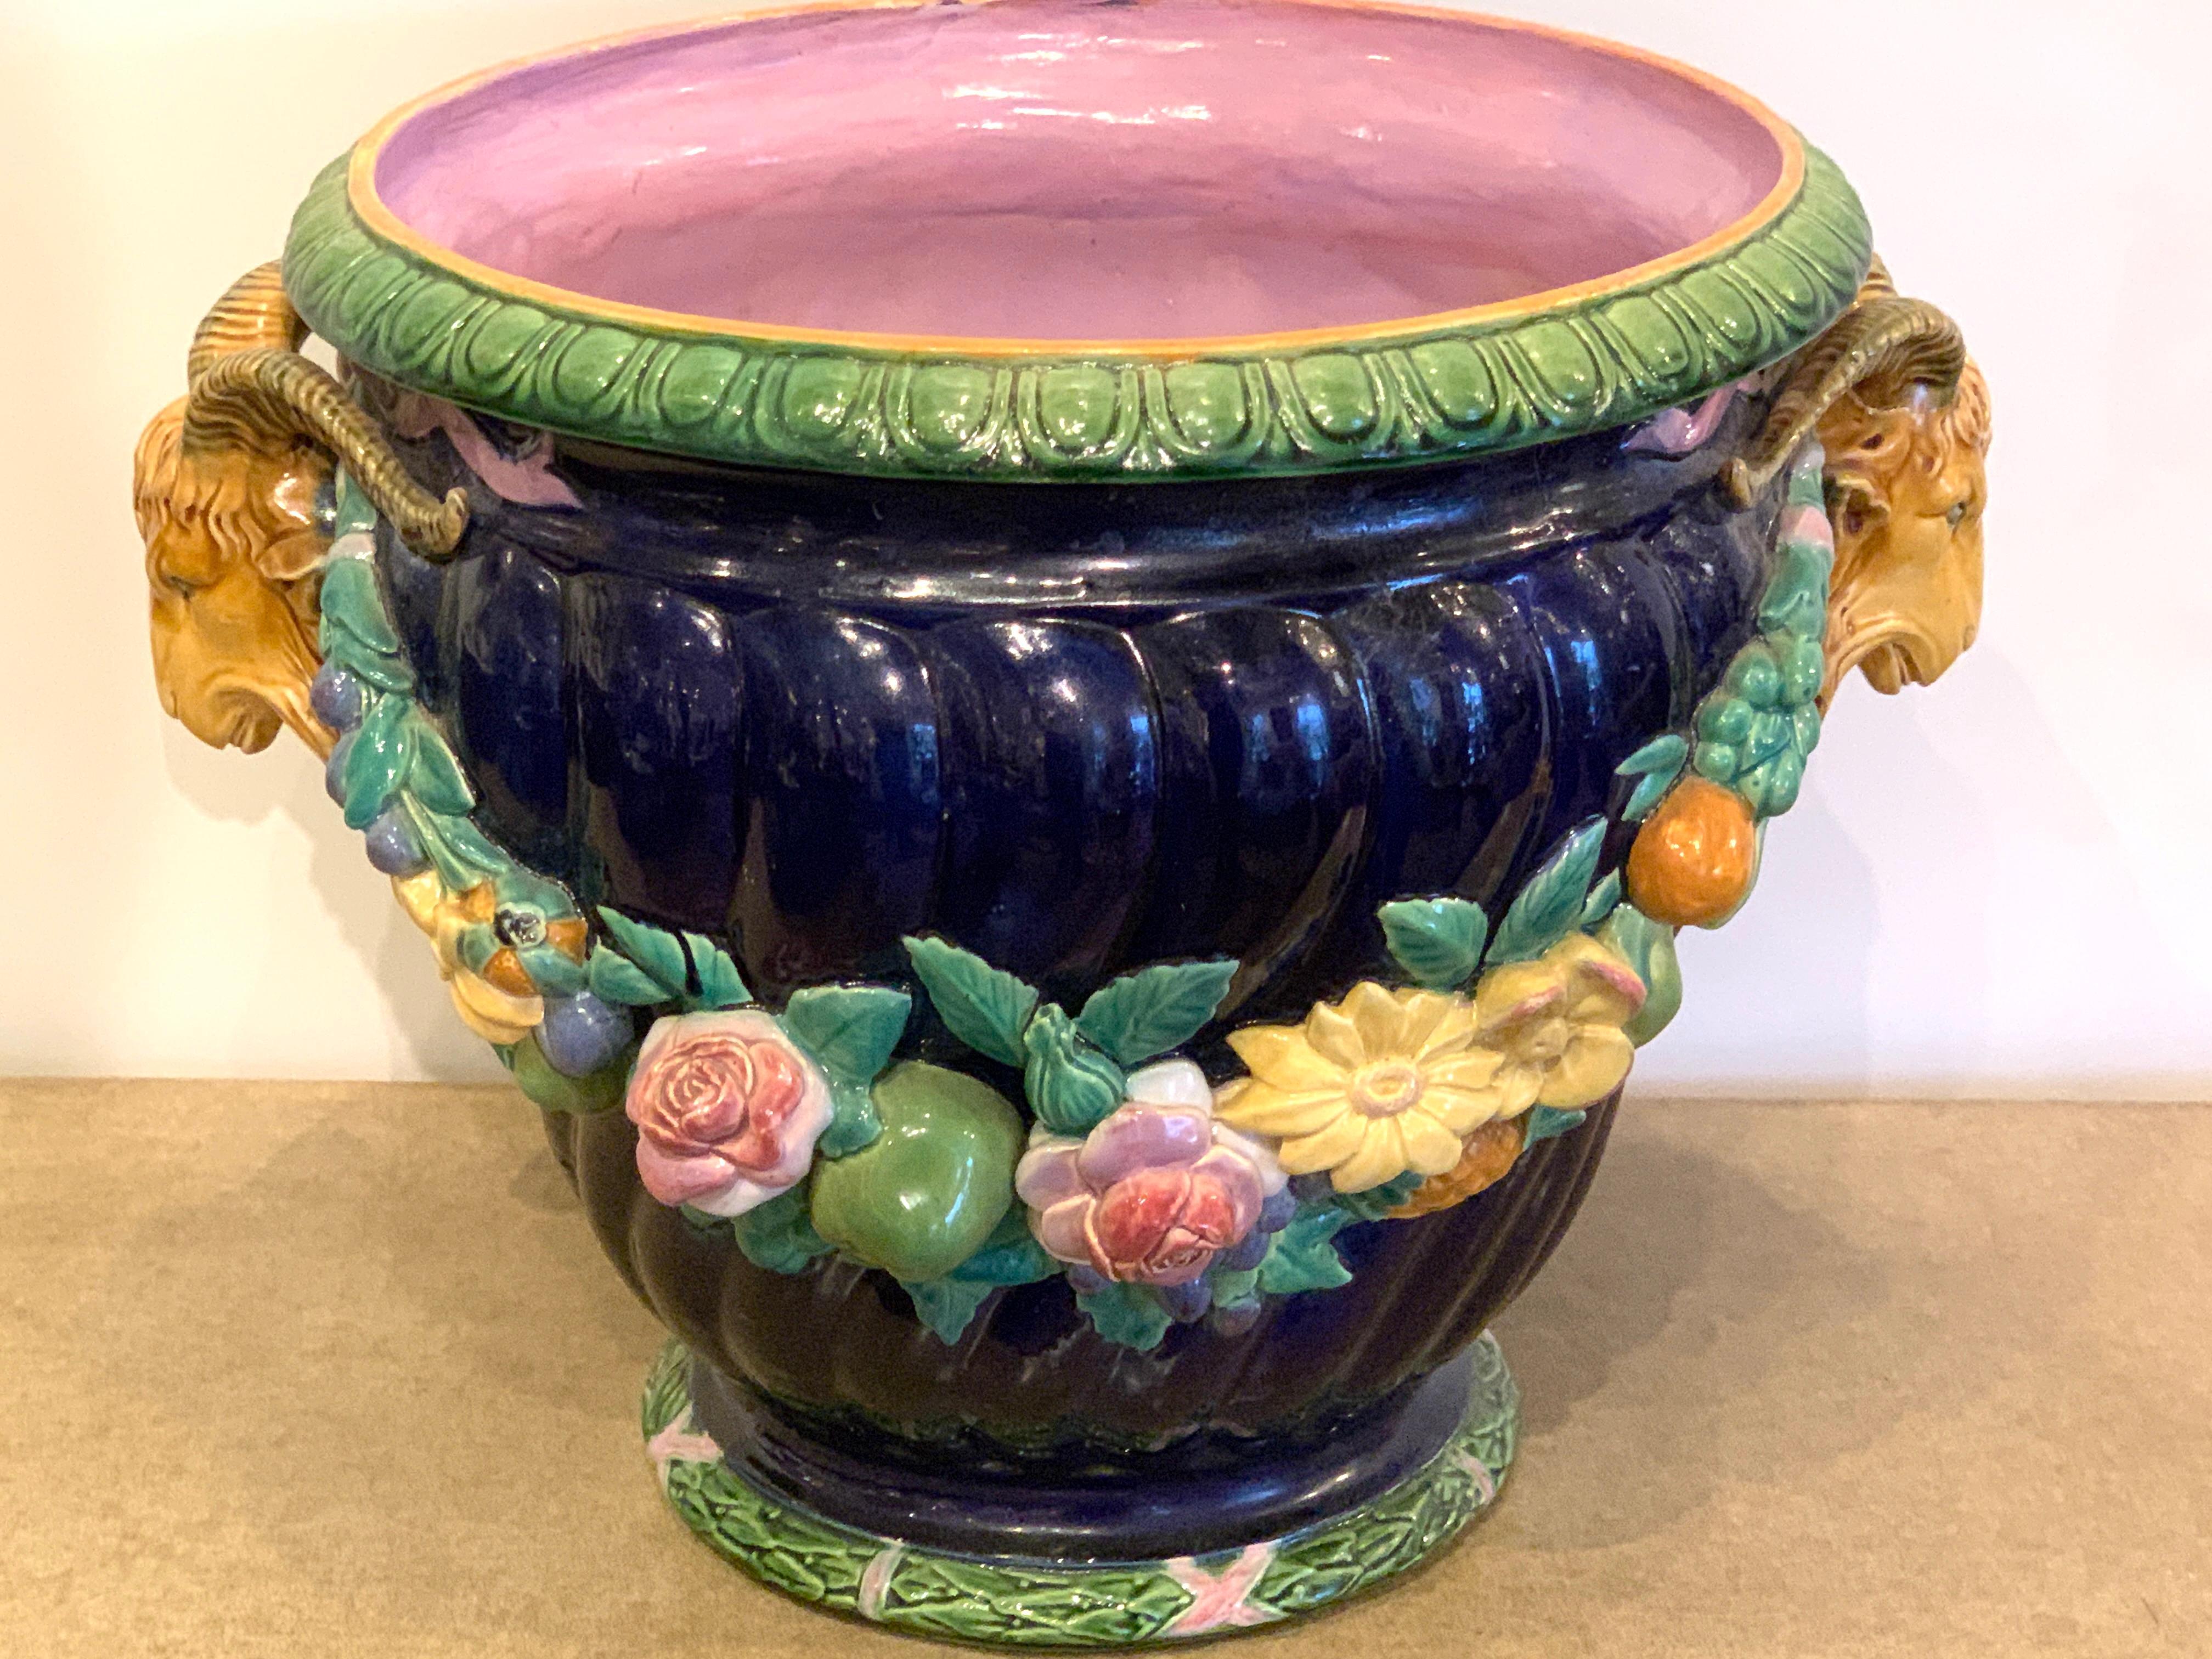 Mintons Majolica Jardinière designed by Baron Carlo Marochetti
Consisting of two pieces with cobalt blue background, Marked and date stamped for 1876, shape number 727
Jardinière 13.5